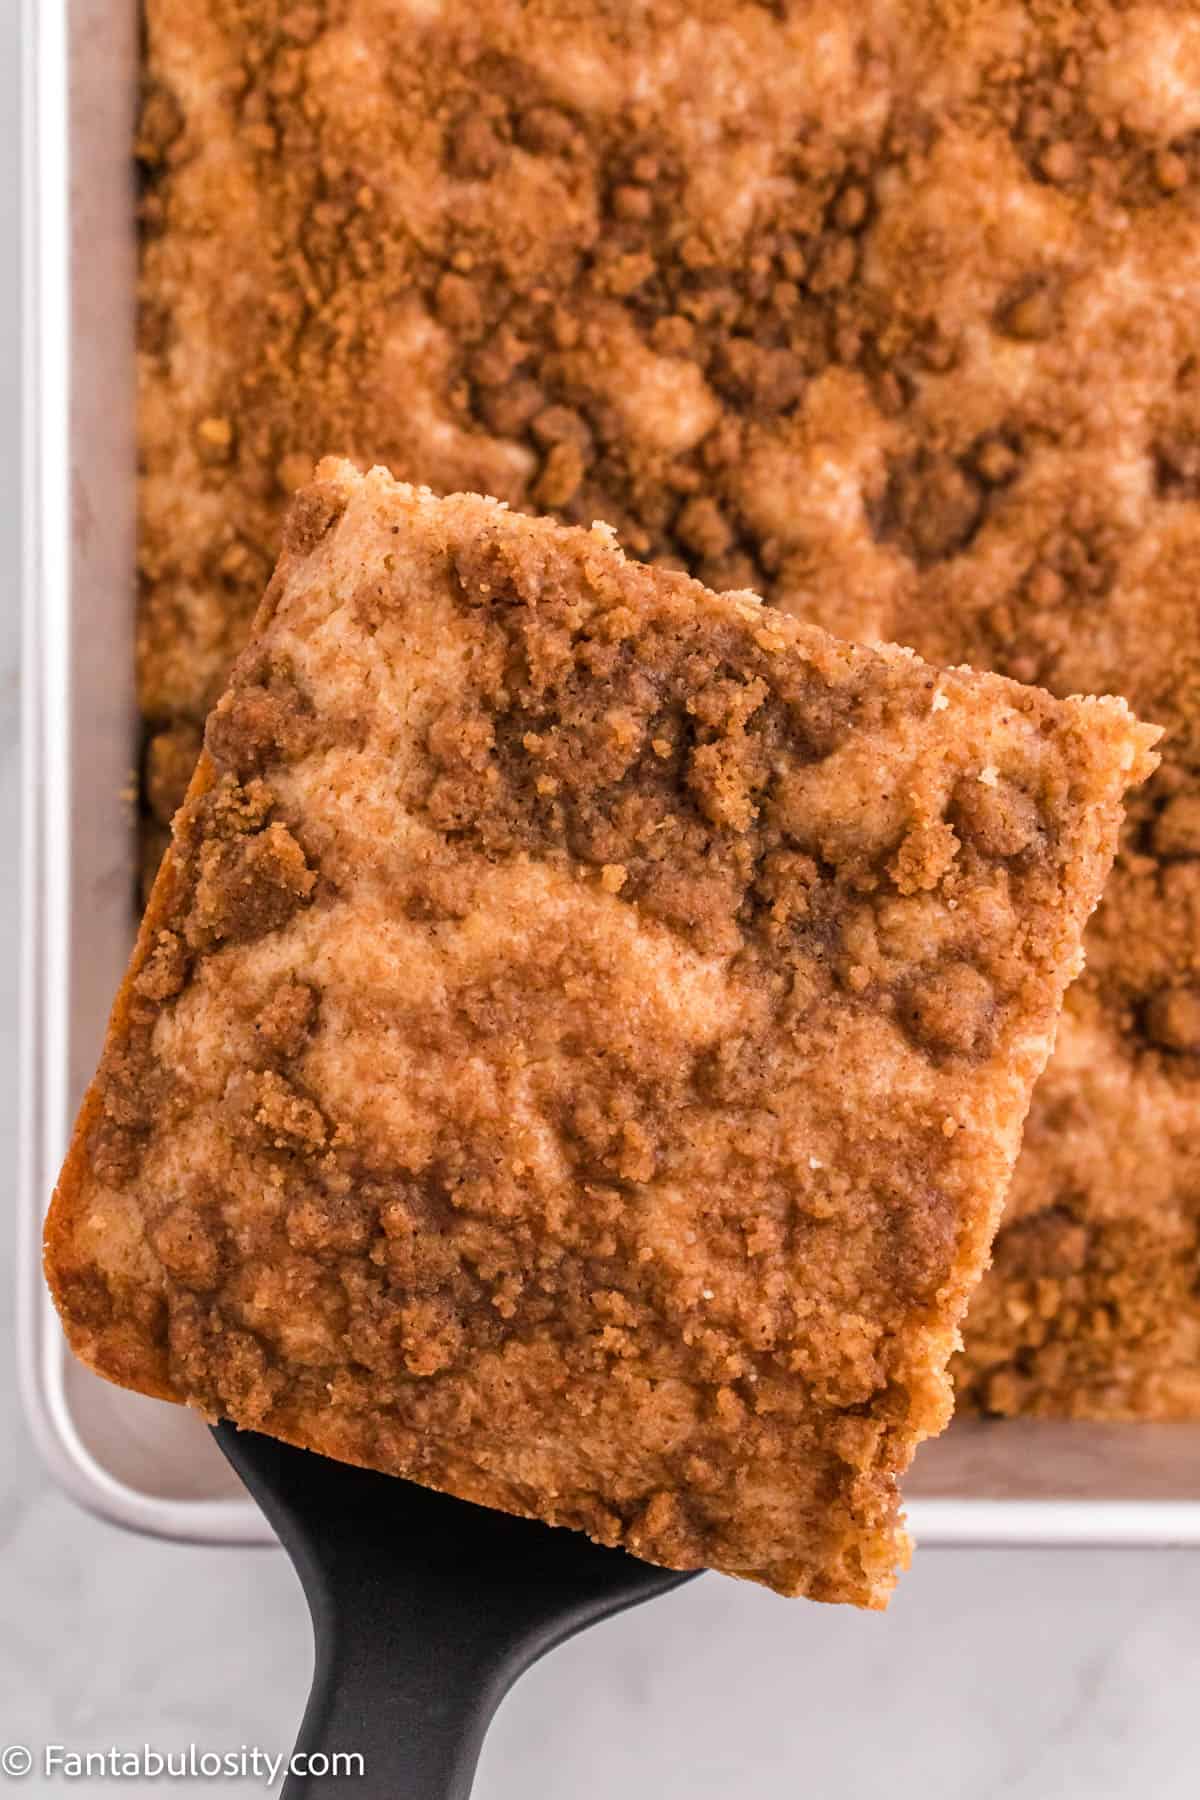 A slice of Cinnamon Coffee Cake is displayed on a spatula above the cake pan